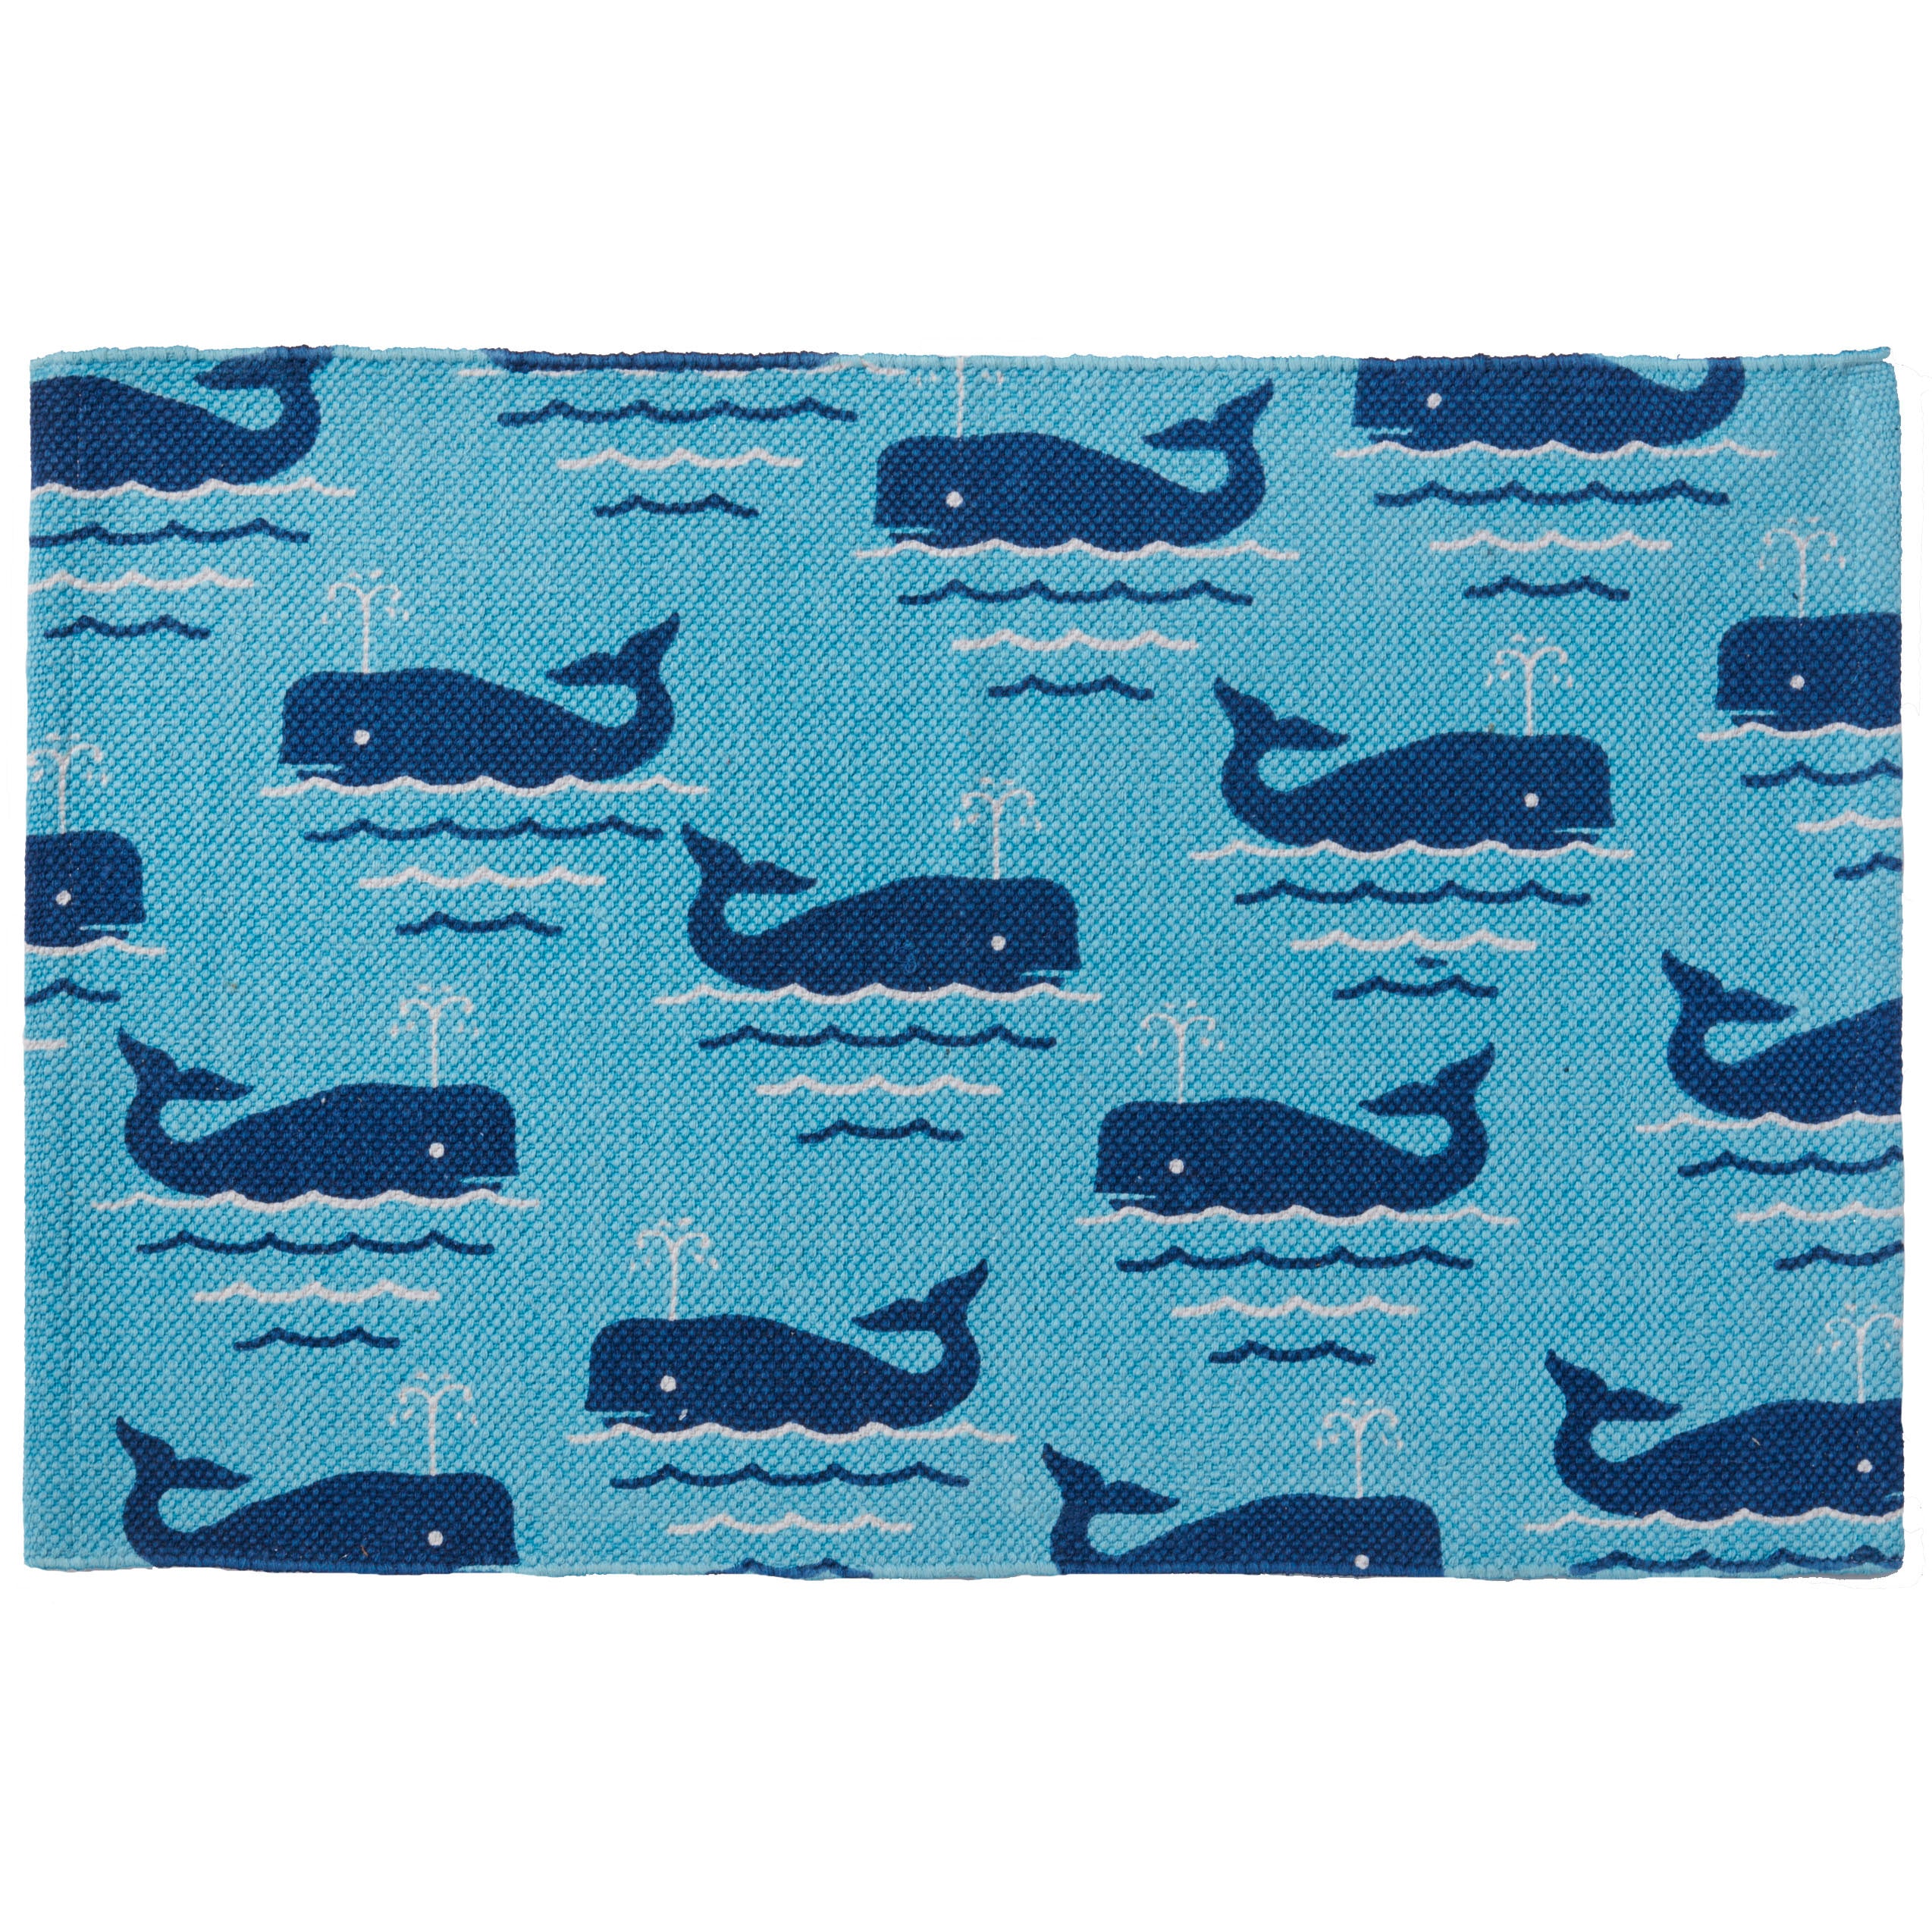 Whales Cotton Rug